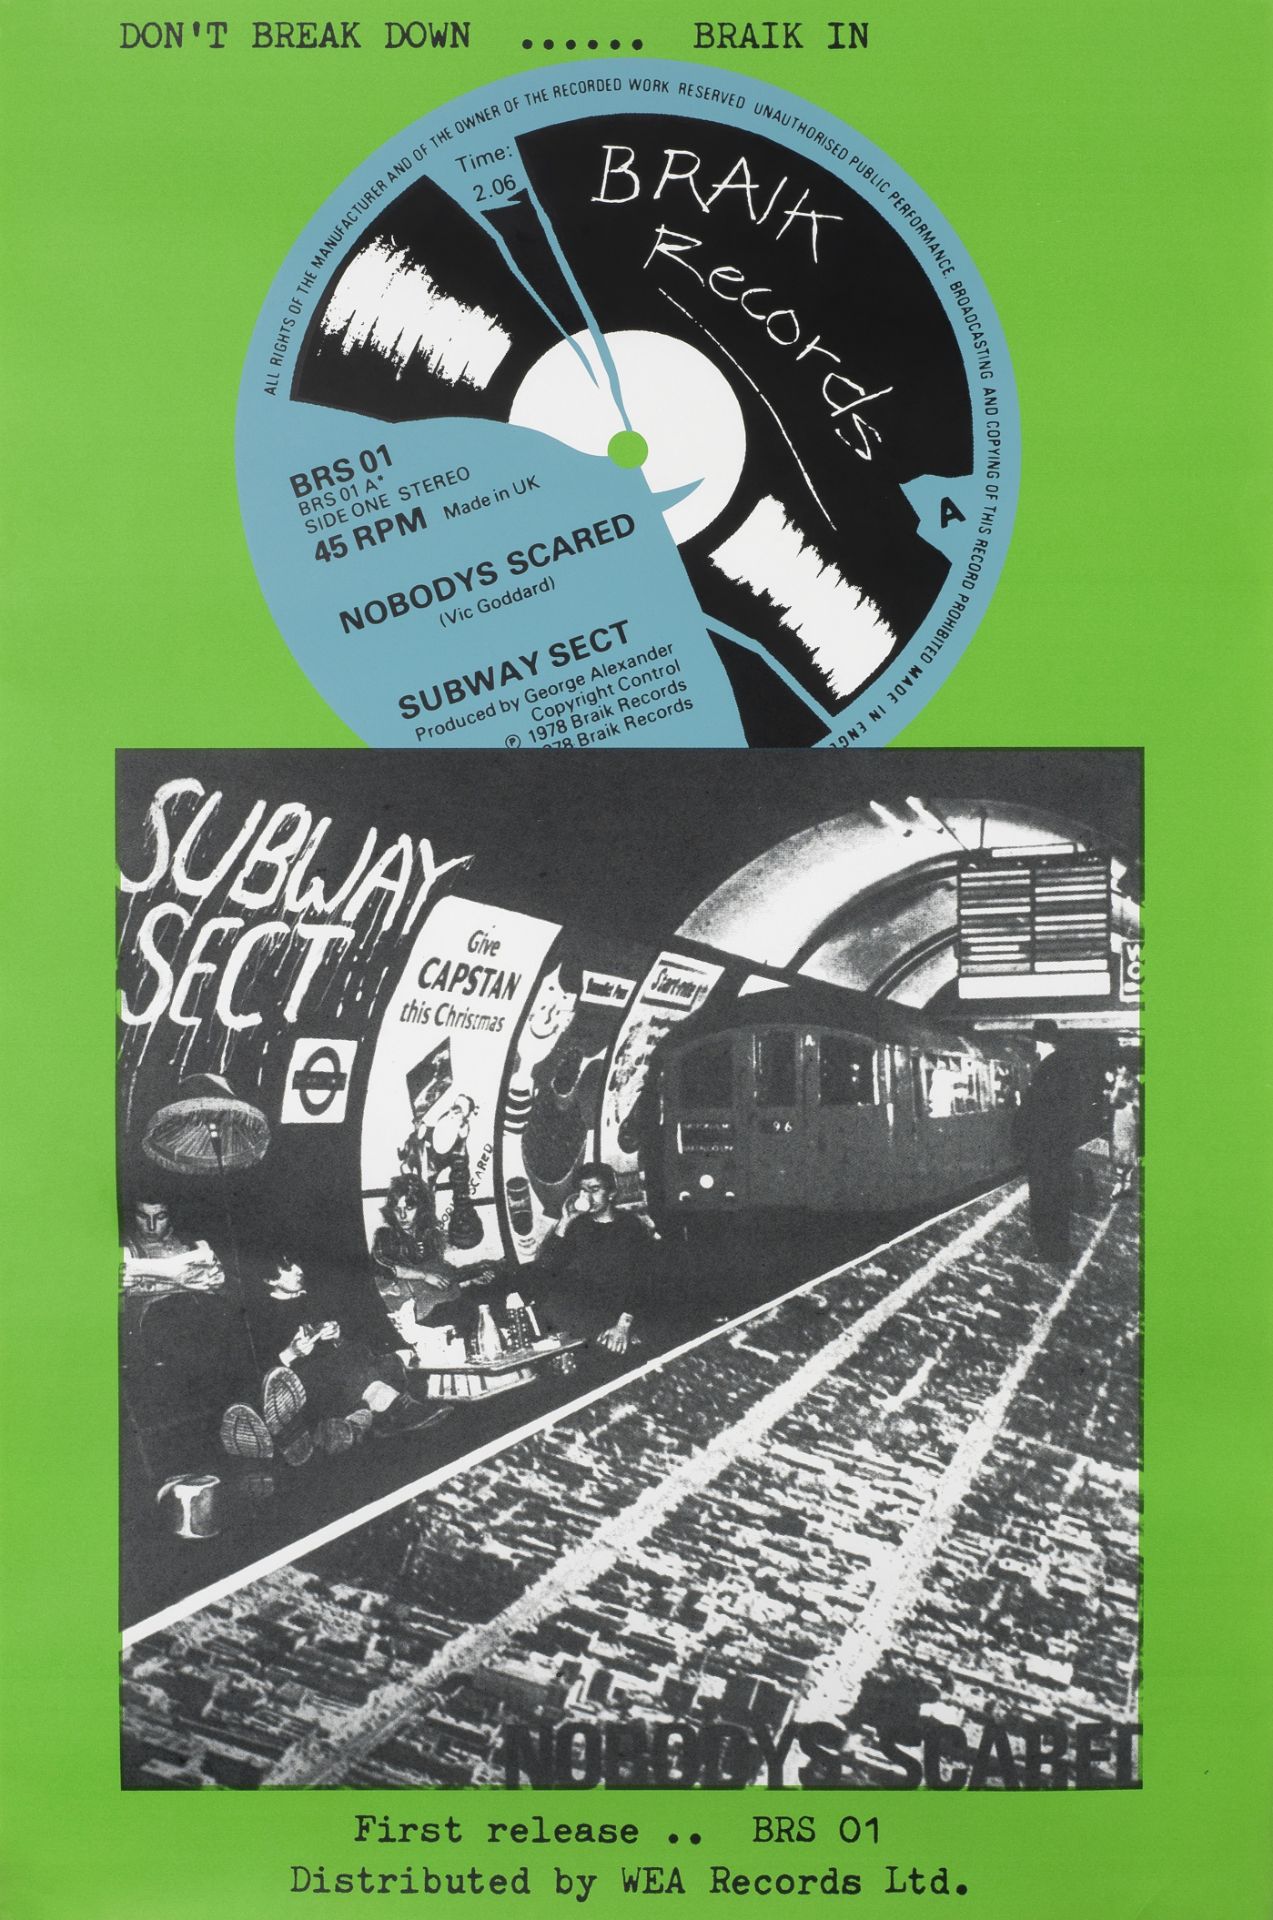 Subway Sect An Original Promotional Poster For The Single Nobody's Scared, Braik Records, 1978